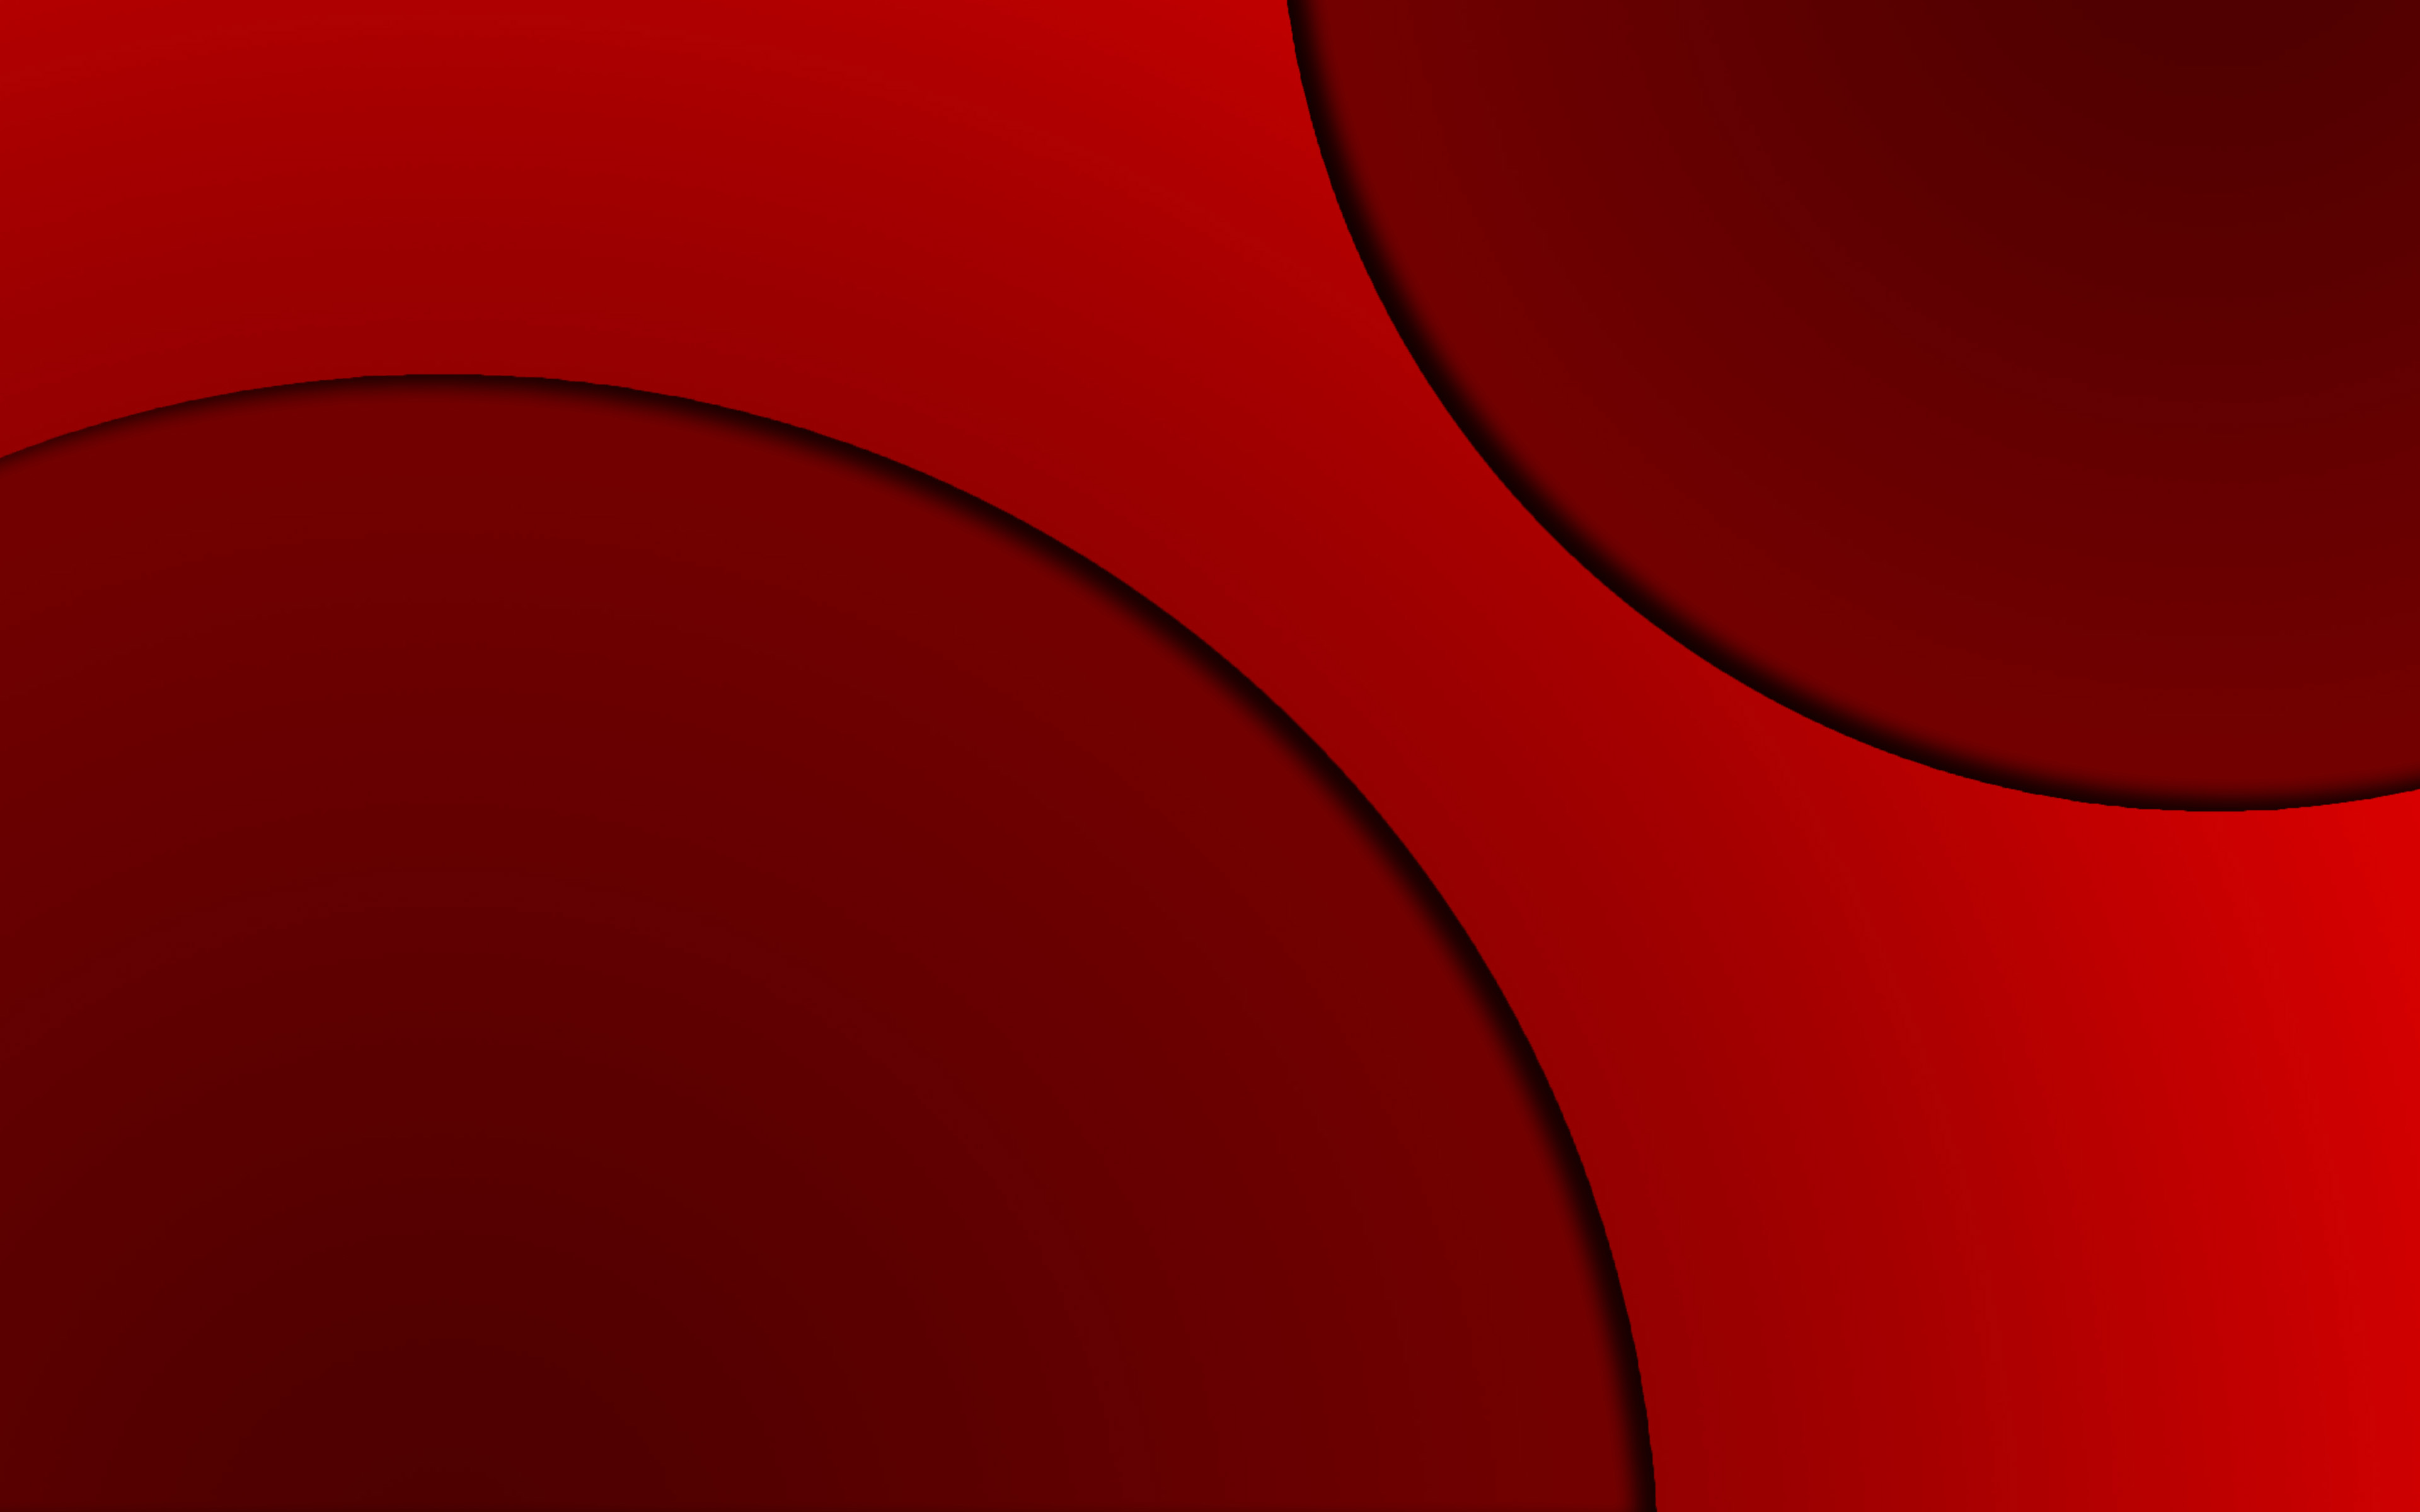 Download wallpaper 1600x900 red solid light bright scarlet widescreen  169 hd background